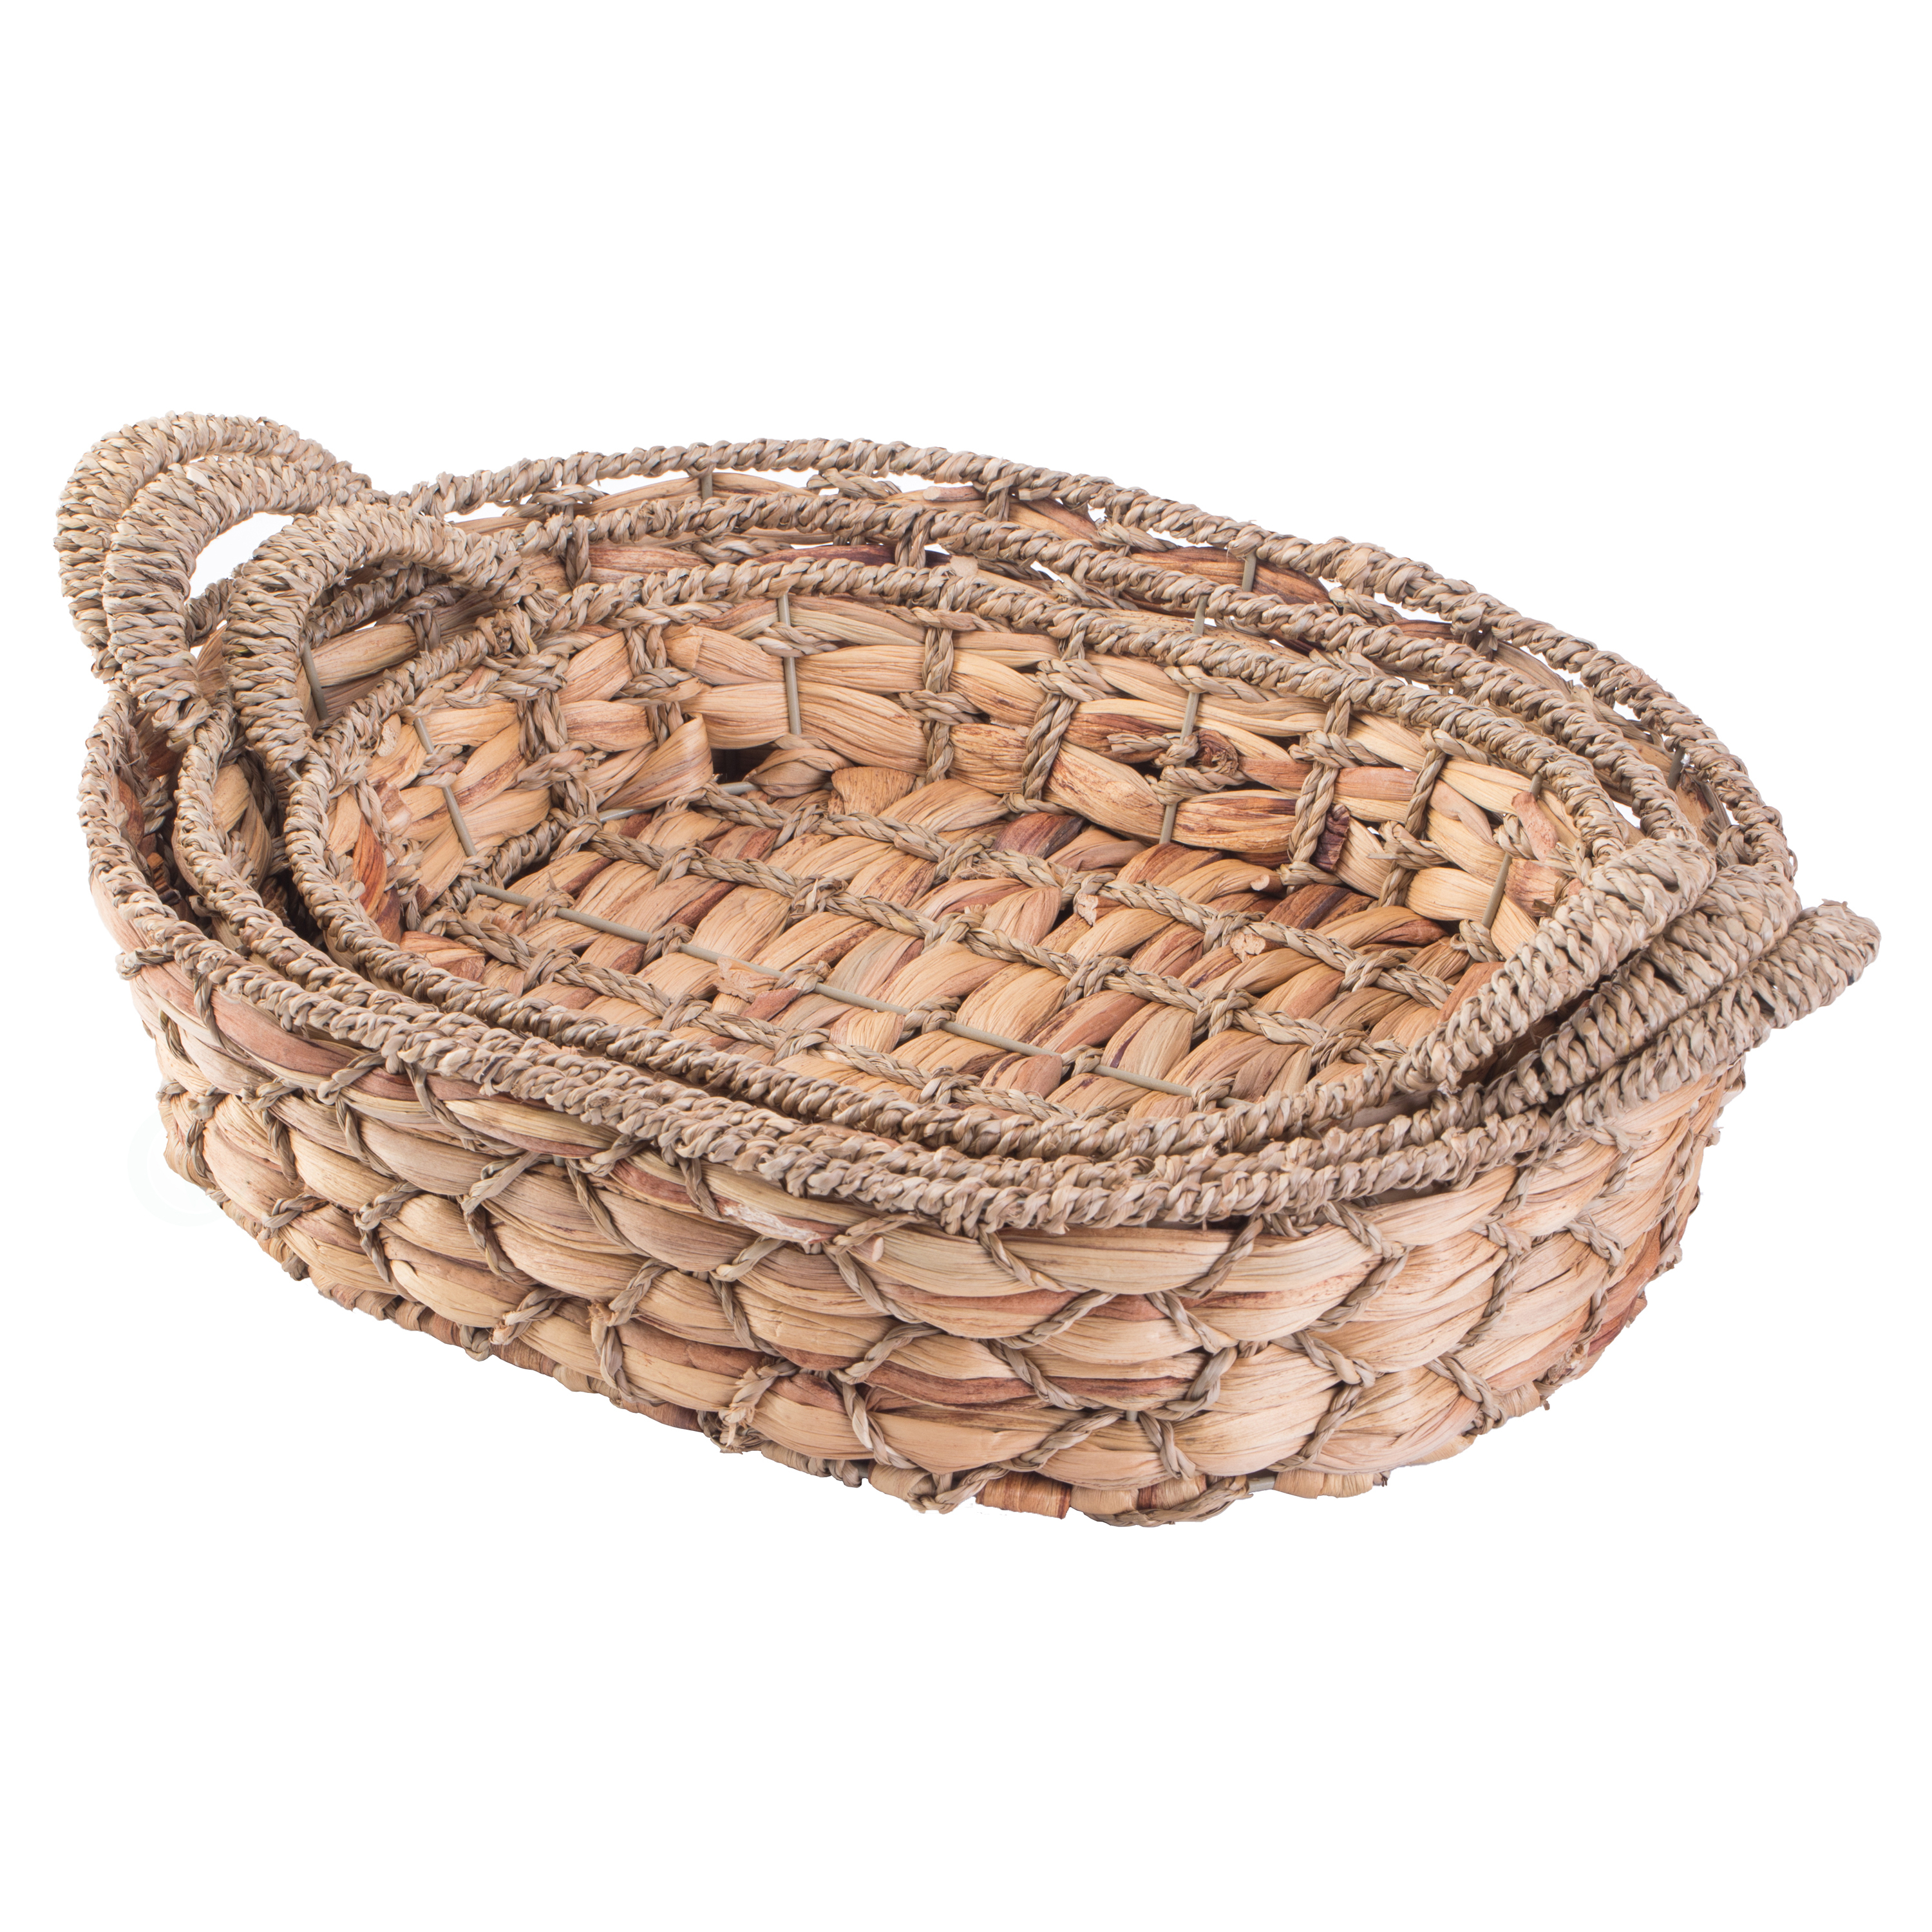 Seagrass Fruit Bread Basket Tray With Handles - Set Of 3